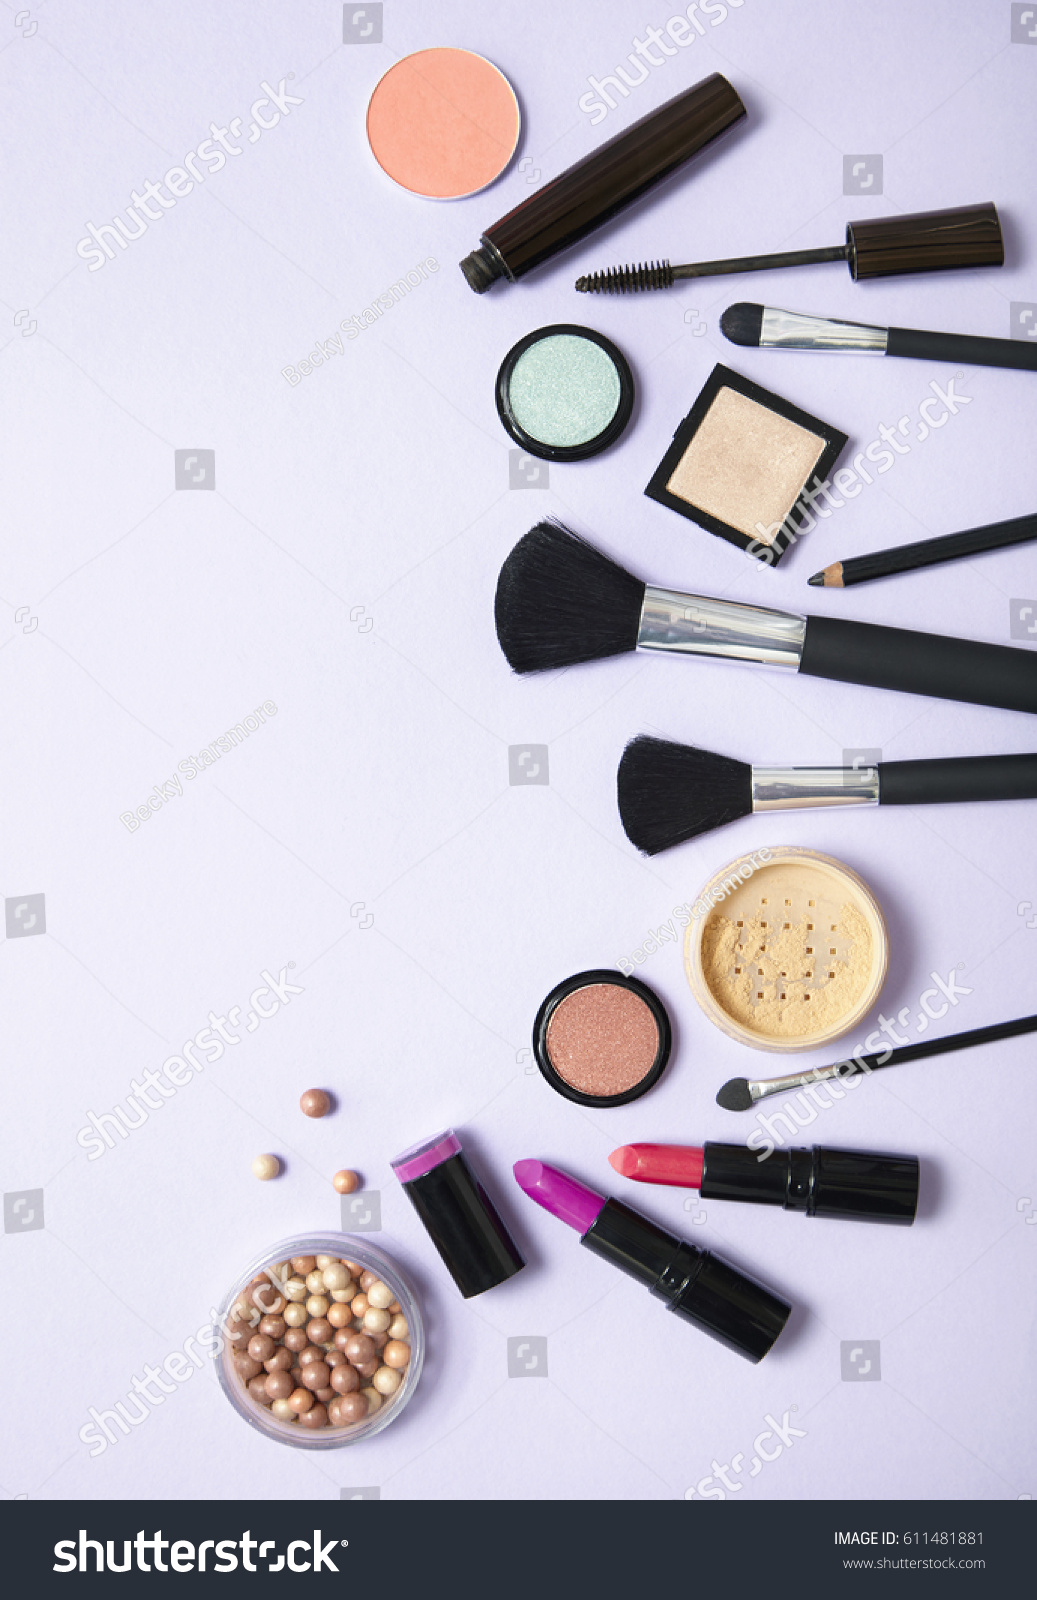 A collection of make up and cosmetic beauty products arranged on a pale purple background #611481881